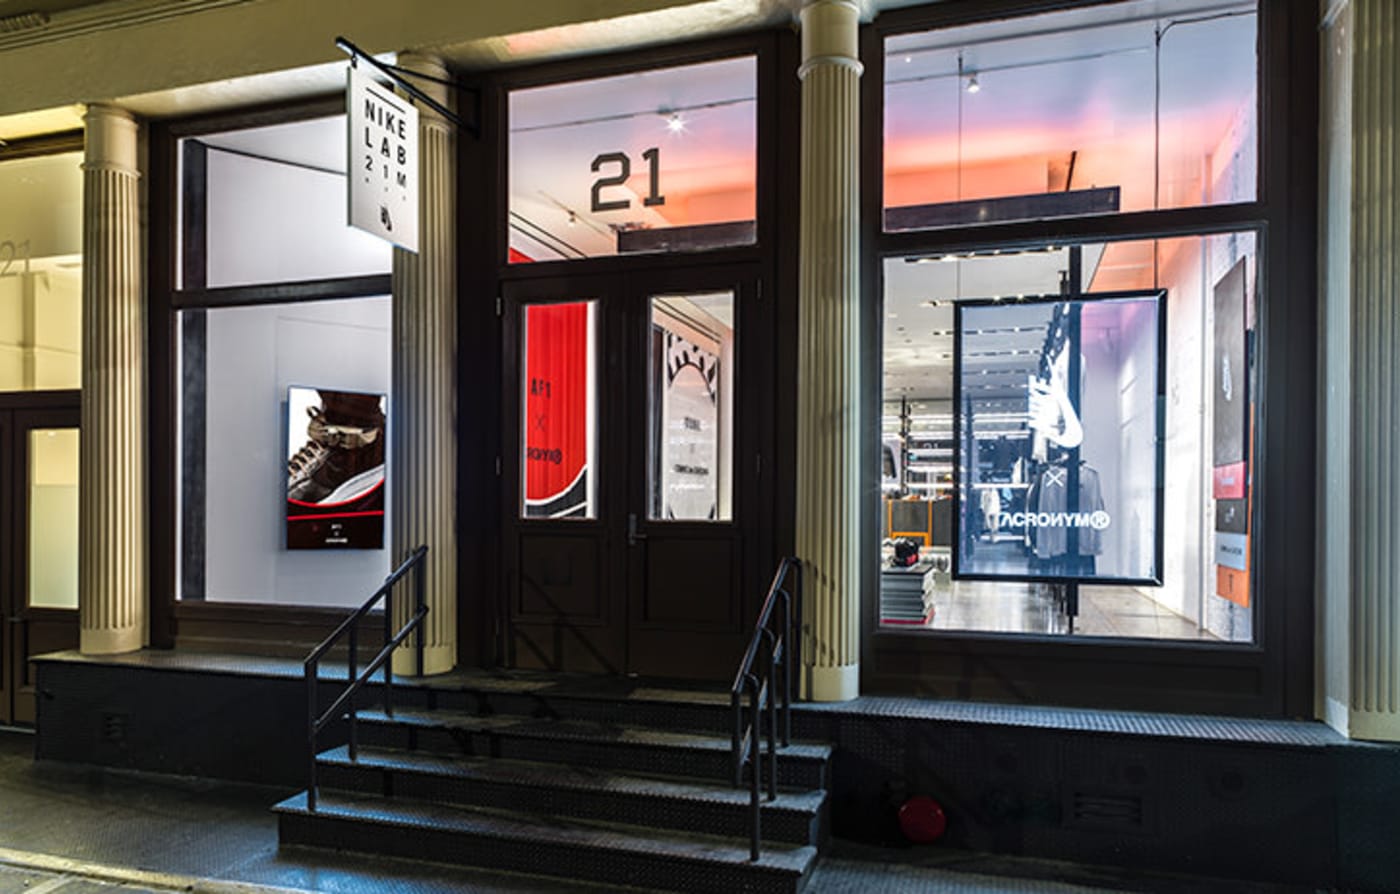 ensayo Fanático Alfombra de pies NikeLab 21 Mercer Store in New York City Closing in 2023 After 15 Years |  Complex